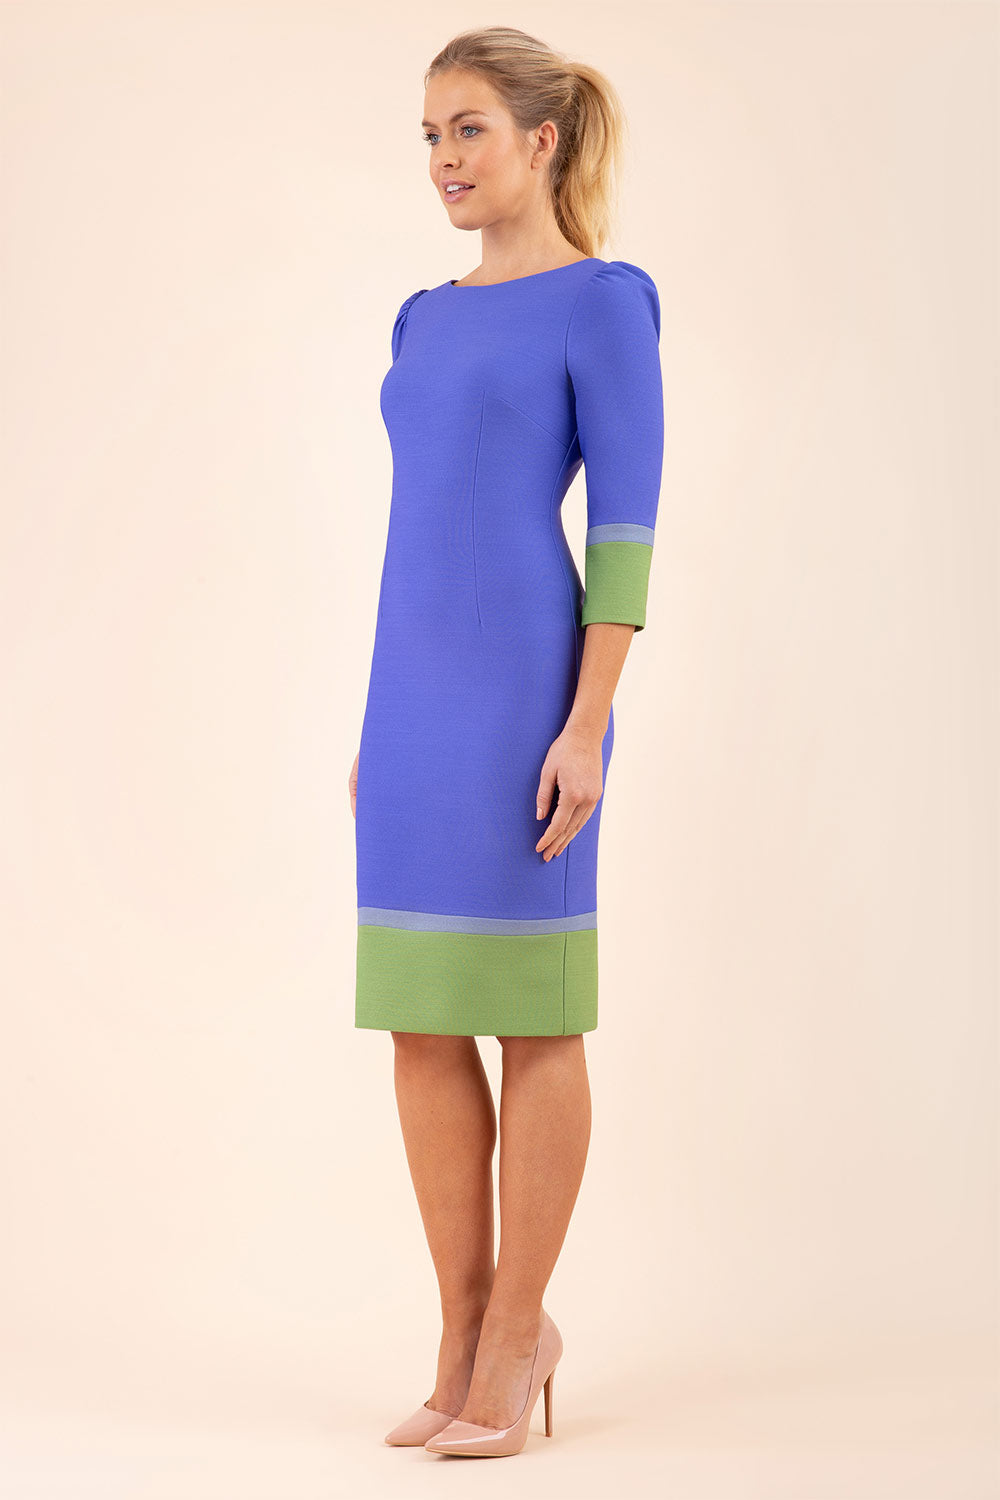 Model wearing the Diva Provence pencil dress design in Thistle blue, citrus green and sky grey colour blocking front image